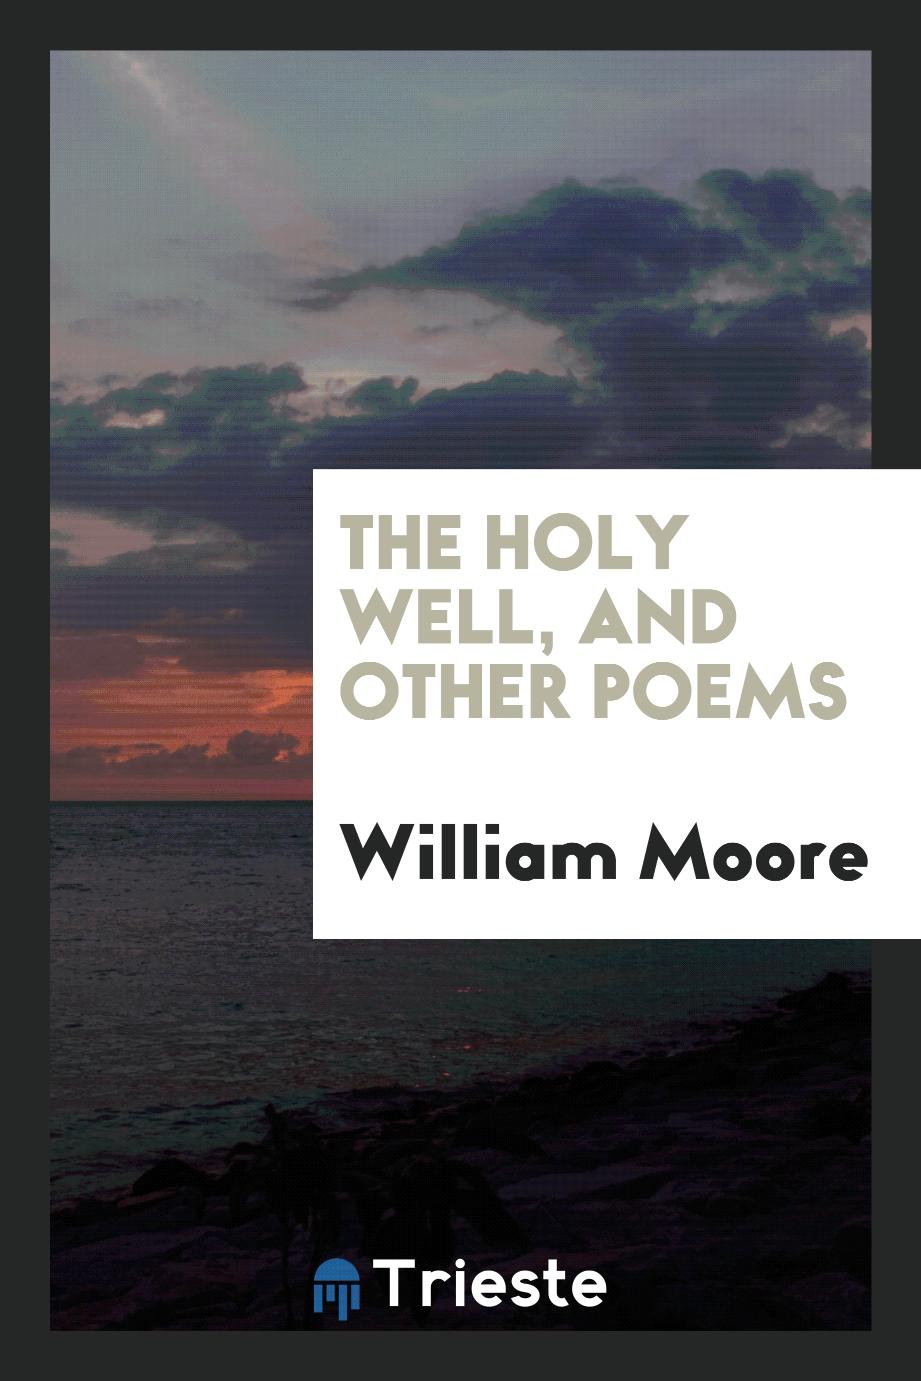 The Holy Well, and Other Poems